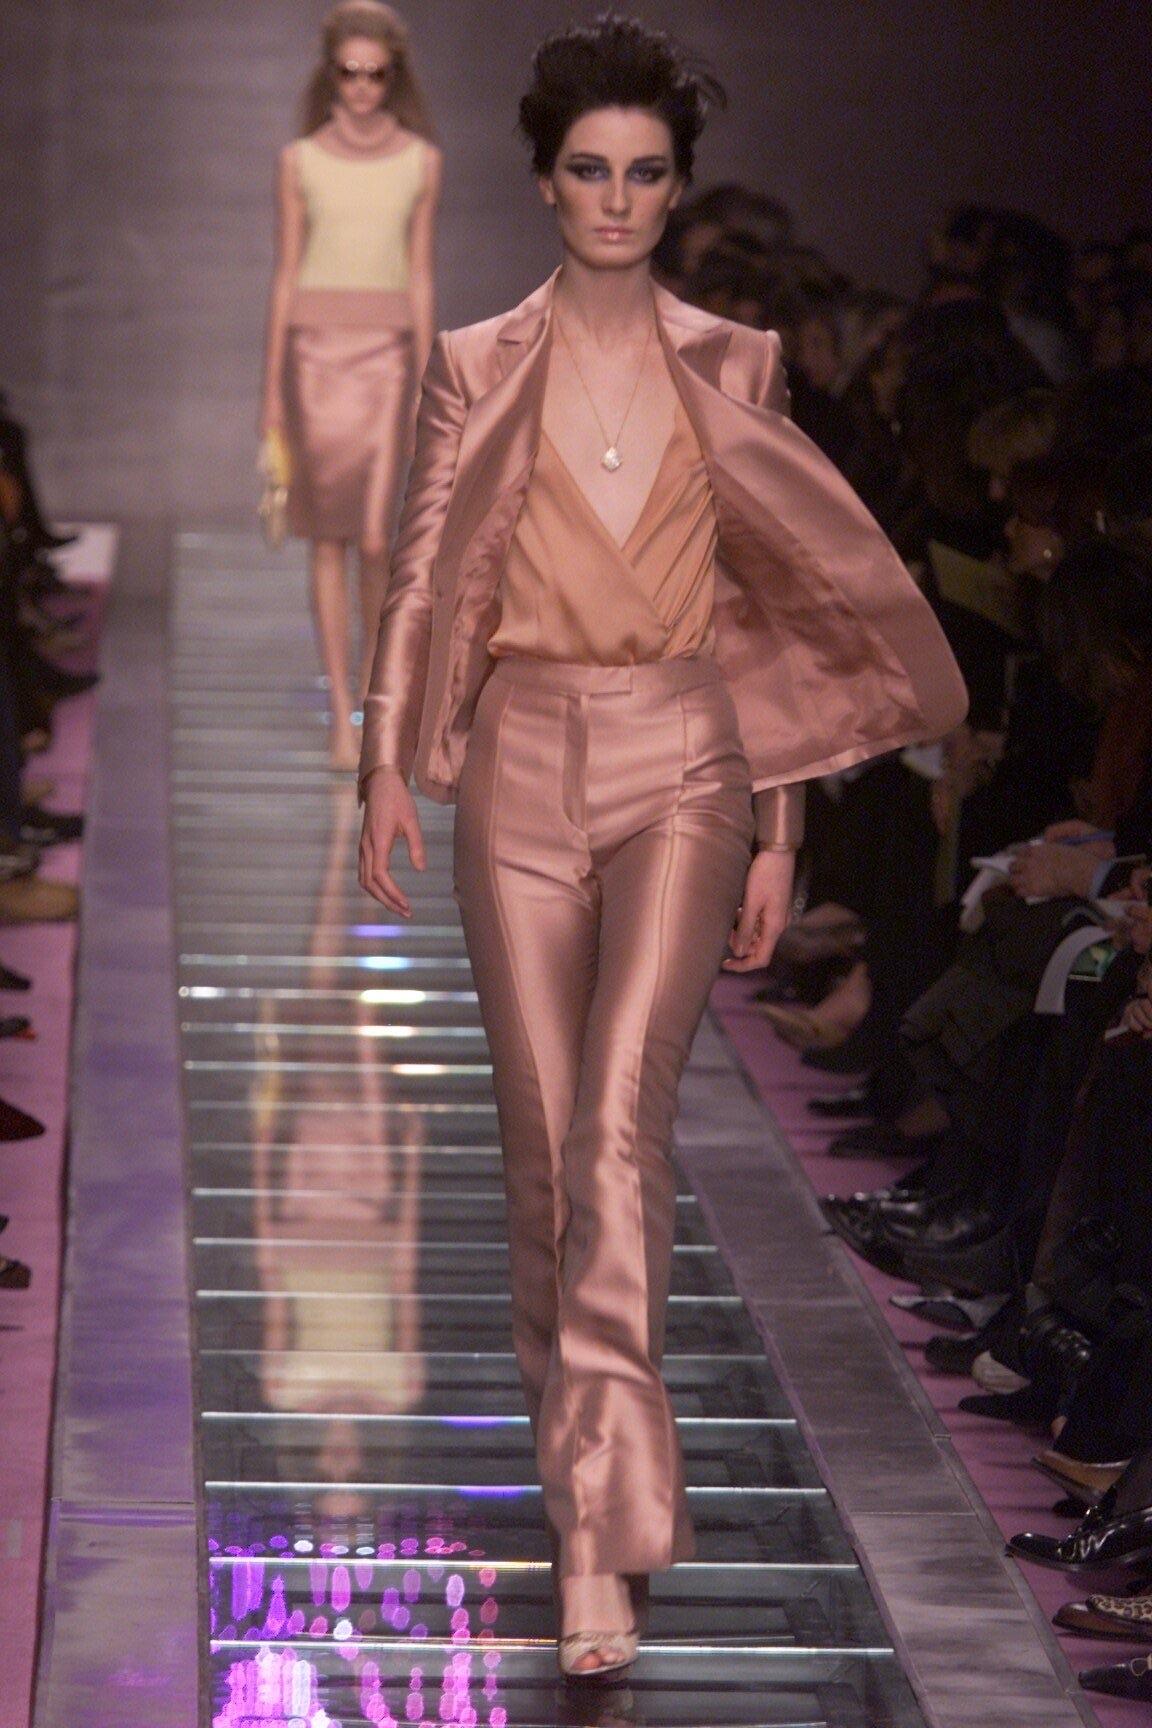 - VERSACE 
- Stunning metallic pink suit
- From the Autumn/Winter 2000 runway collection
- Featured in the A/W 2000 ad campaign 
- 100% Silk
- Silk covered buttons with gold medusa head detailing
- Flattering fitted shape
- Italian size 40
- Made in